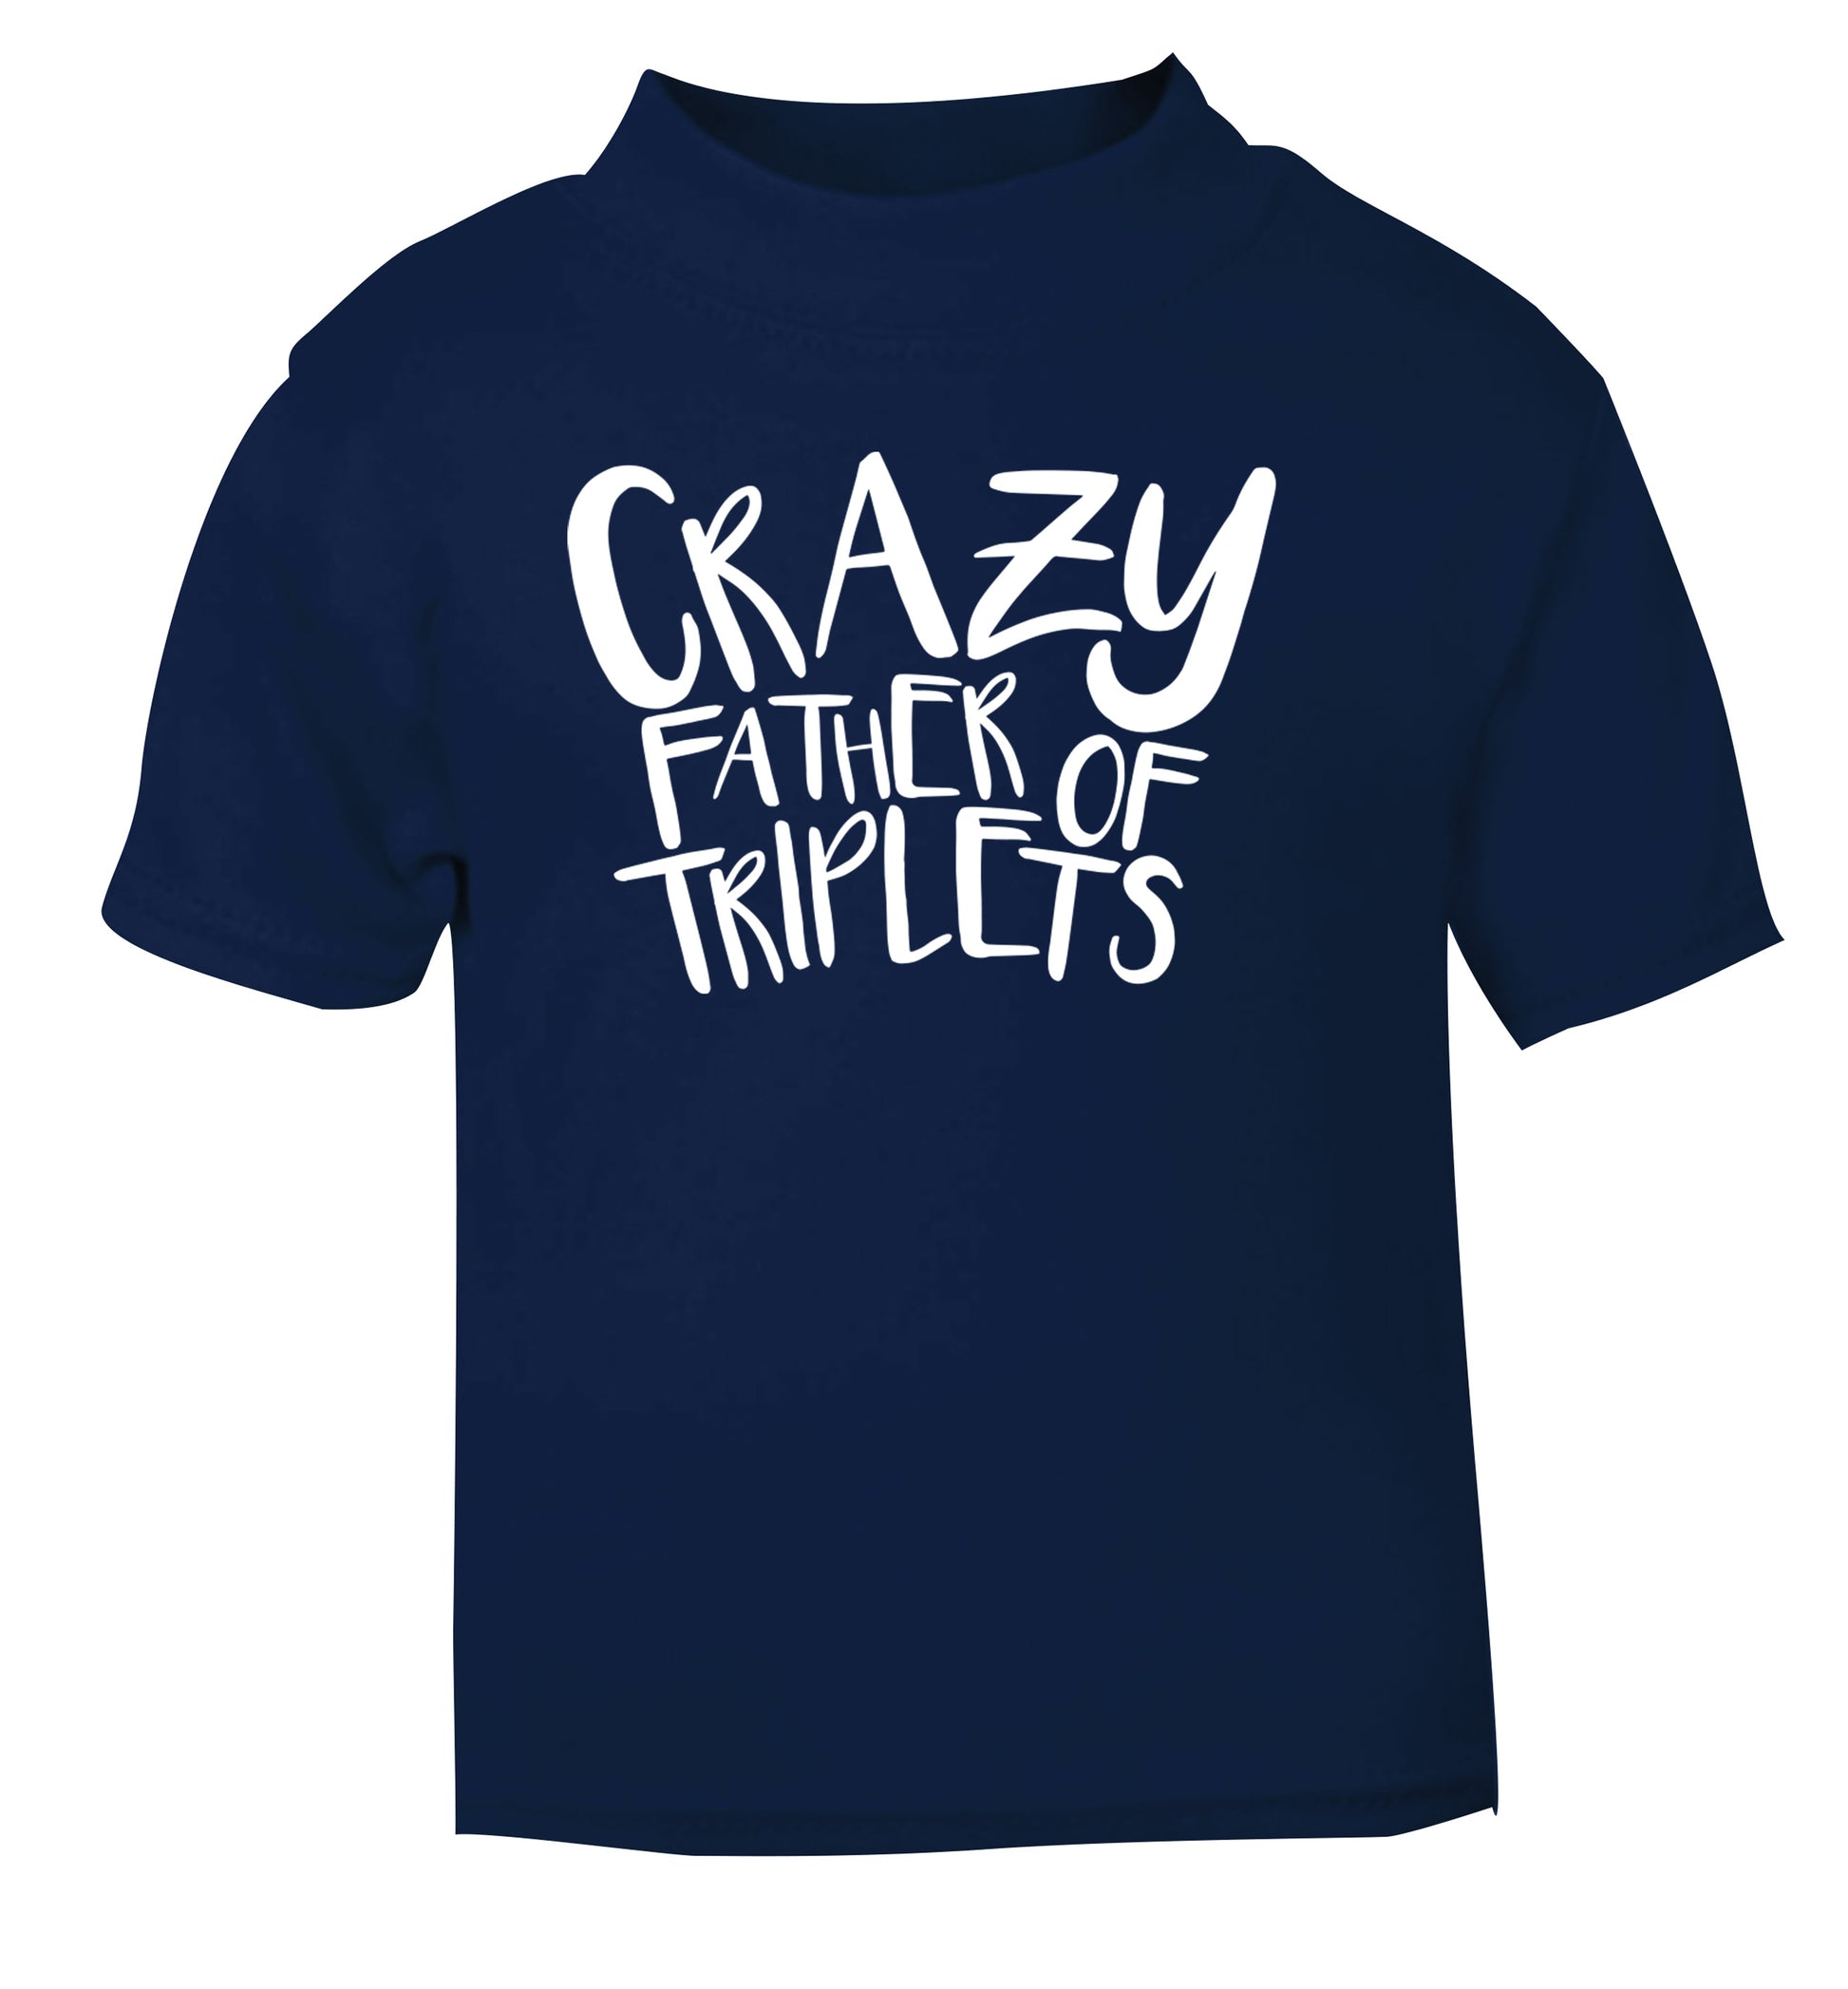 Crazy father of triplets navy Baby Toddler Tshirt 2 Years